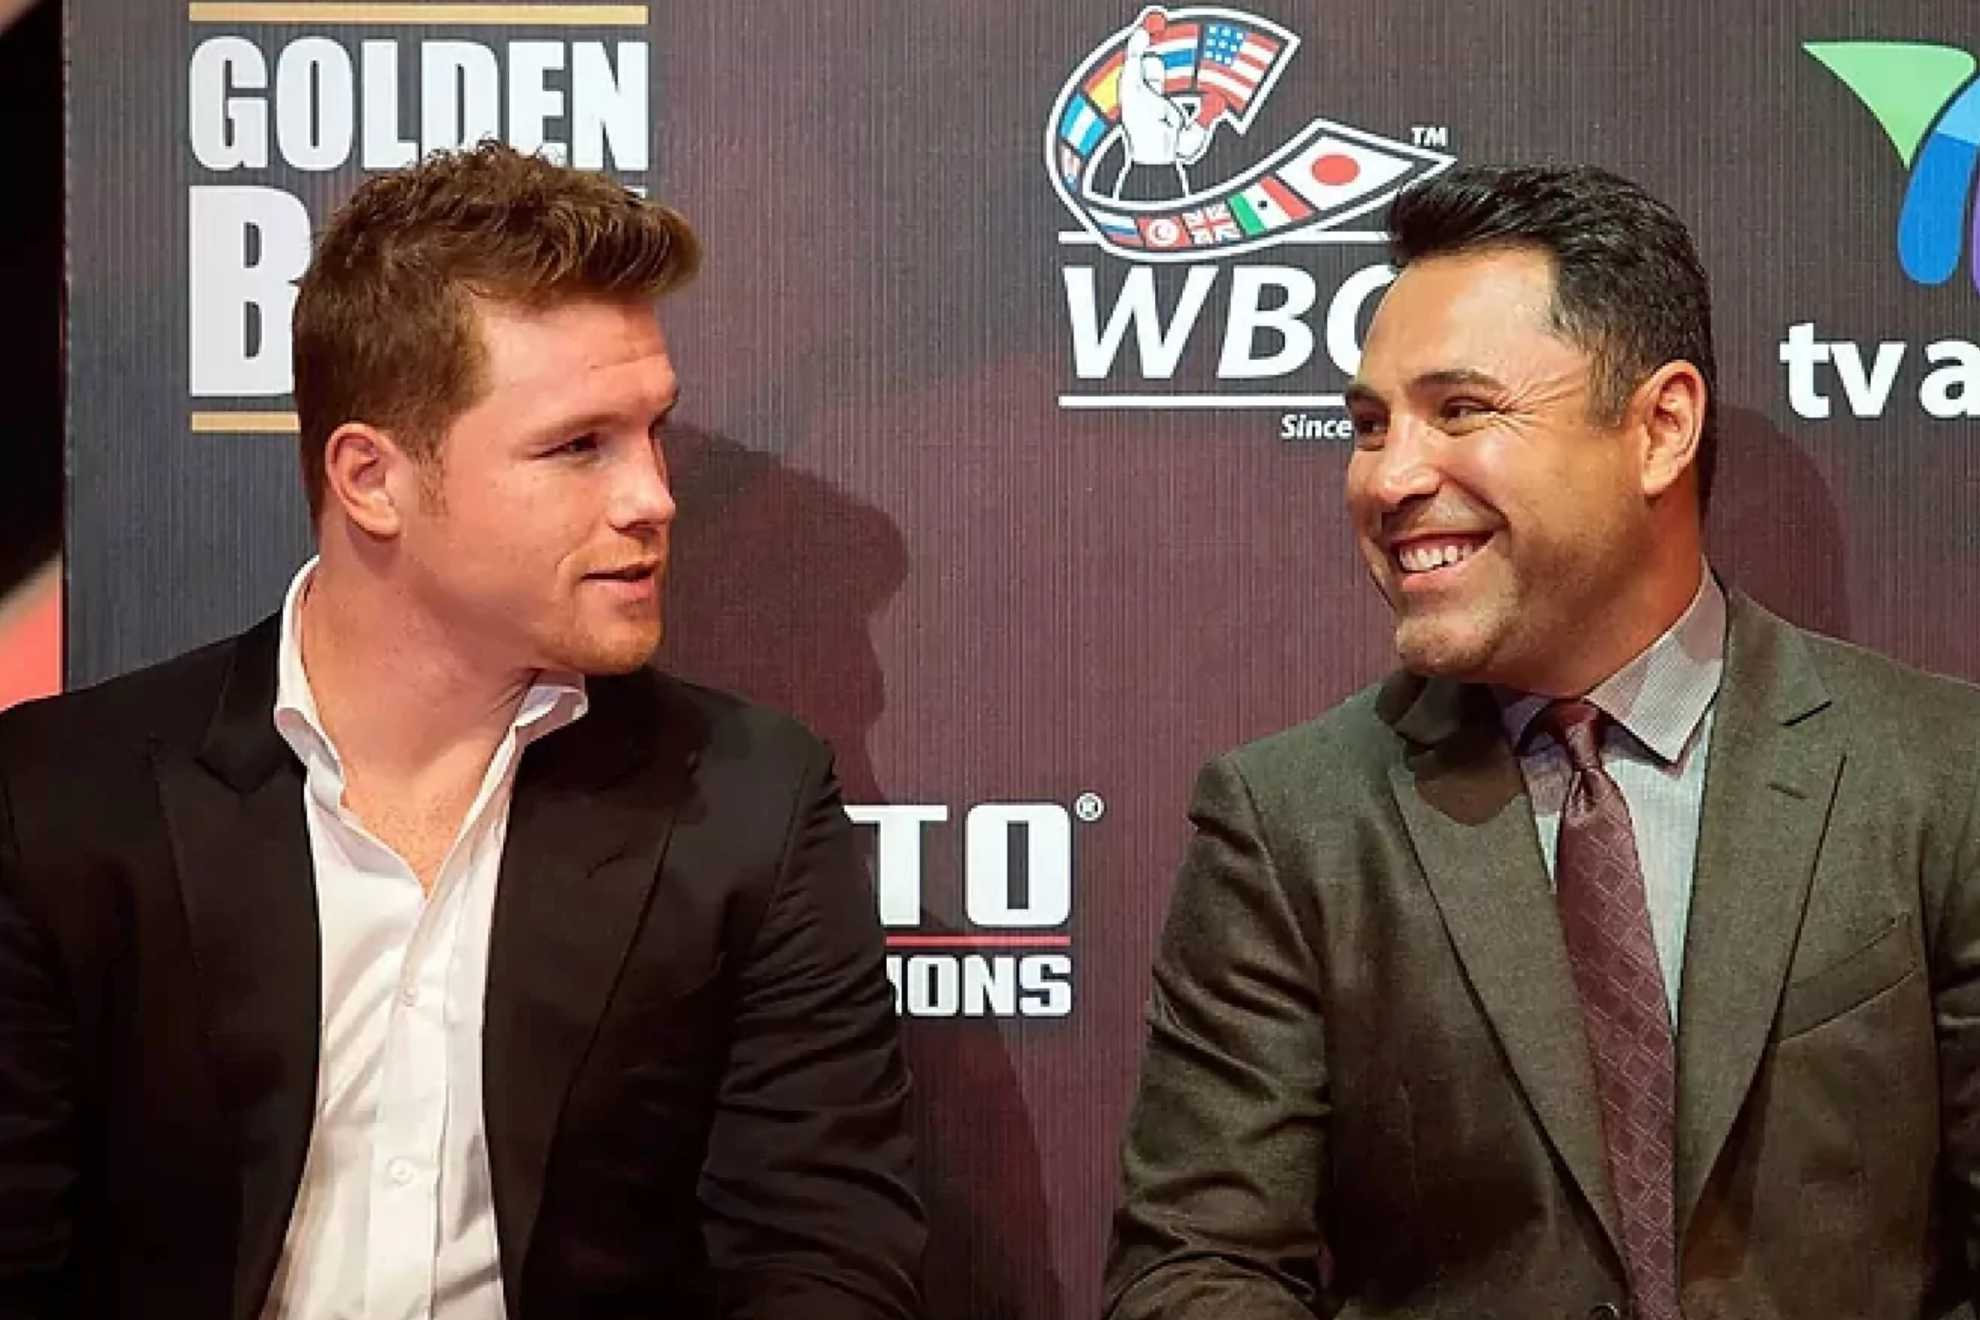 Oscar de la Hoya wants to work with Canelo Alvarez again, but they will have to reconcile first